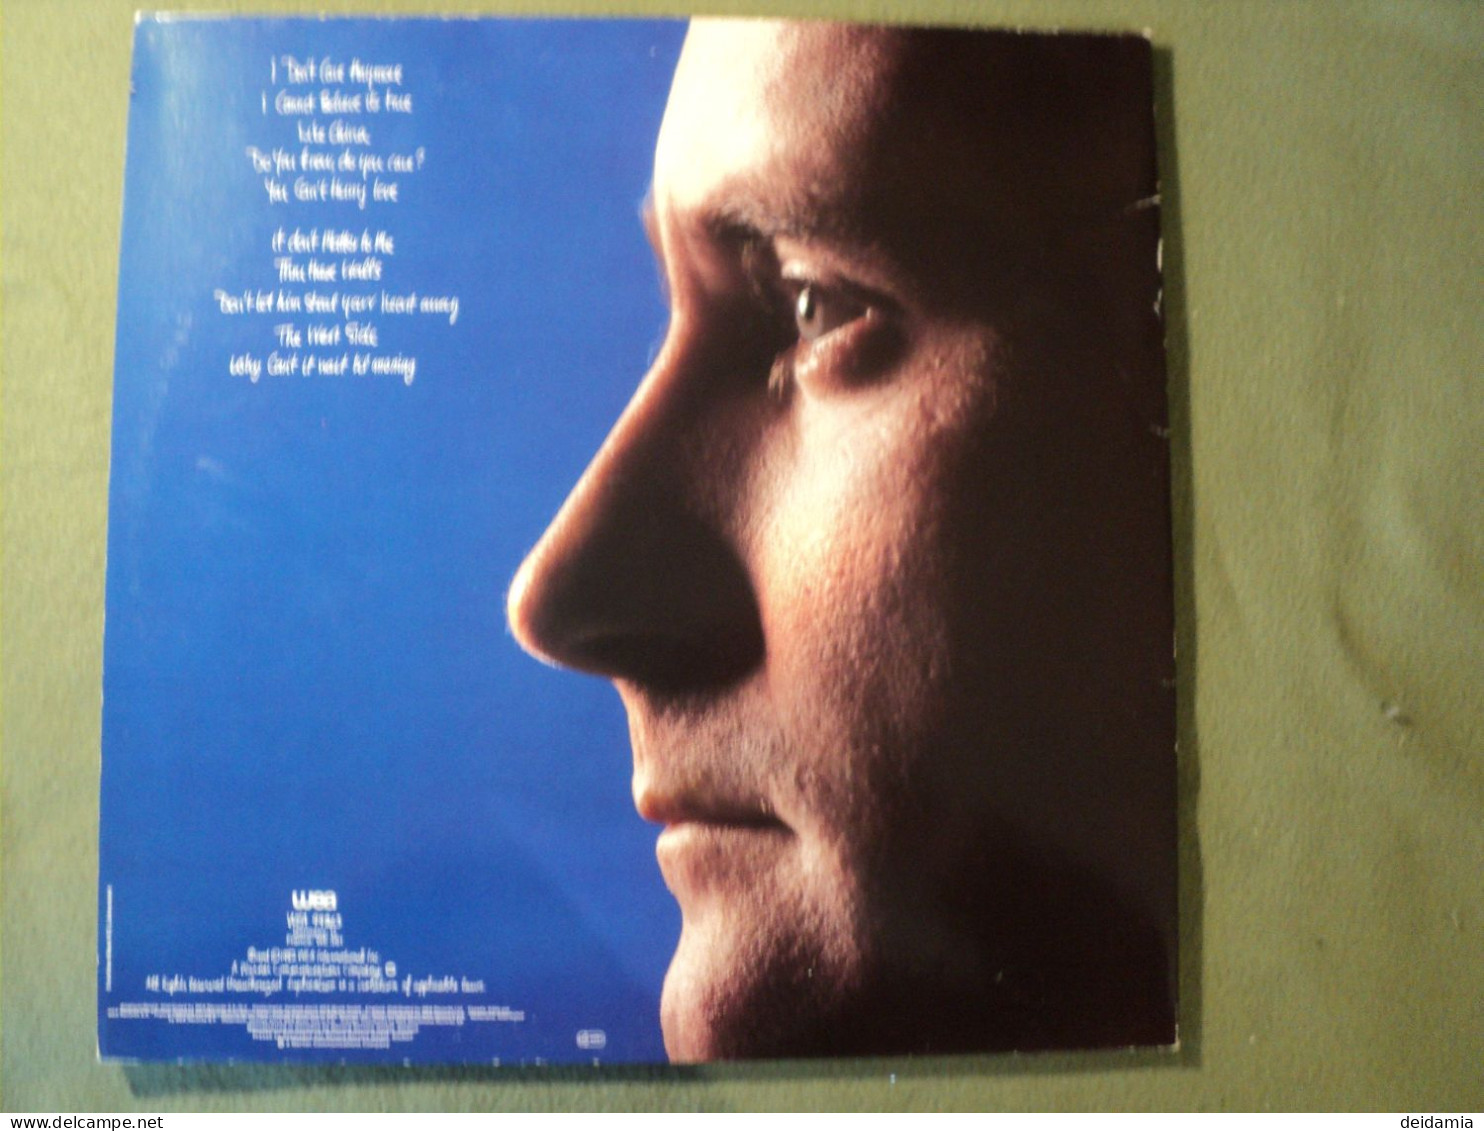 33 TOURS PHIL COLLINS. WEA 99 263. HELLO I MUST BE GOING. 1982 I DON T CARE ANYMORE / I CAN T BELIEVE IT S TRUE / LIKE C - Disco, Pop